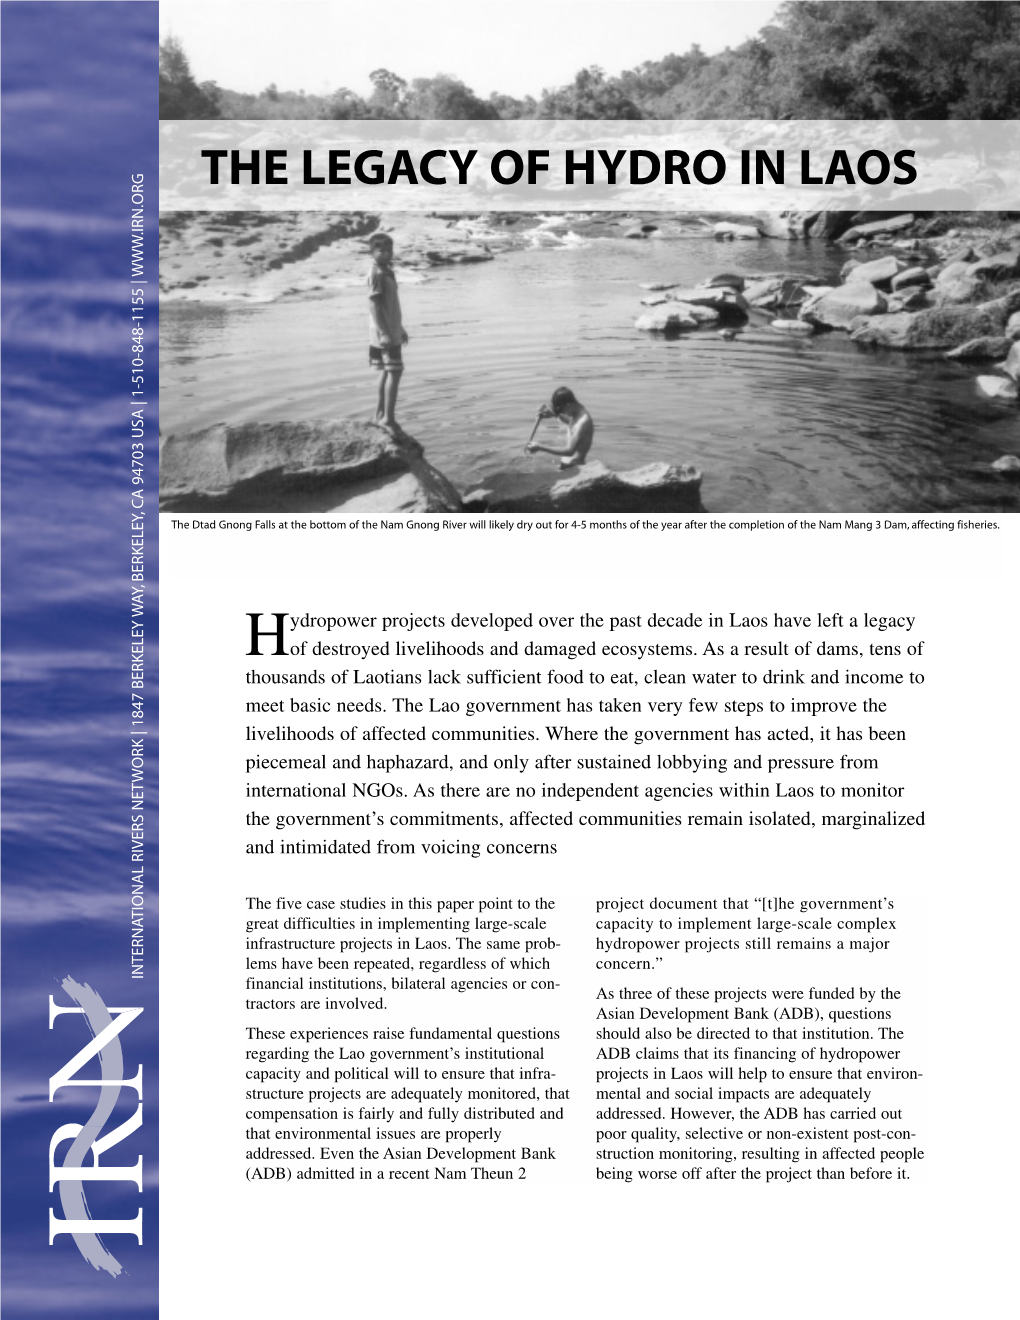 The Legacy of Hydro in Laos